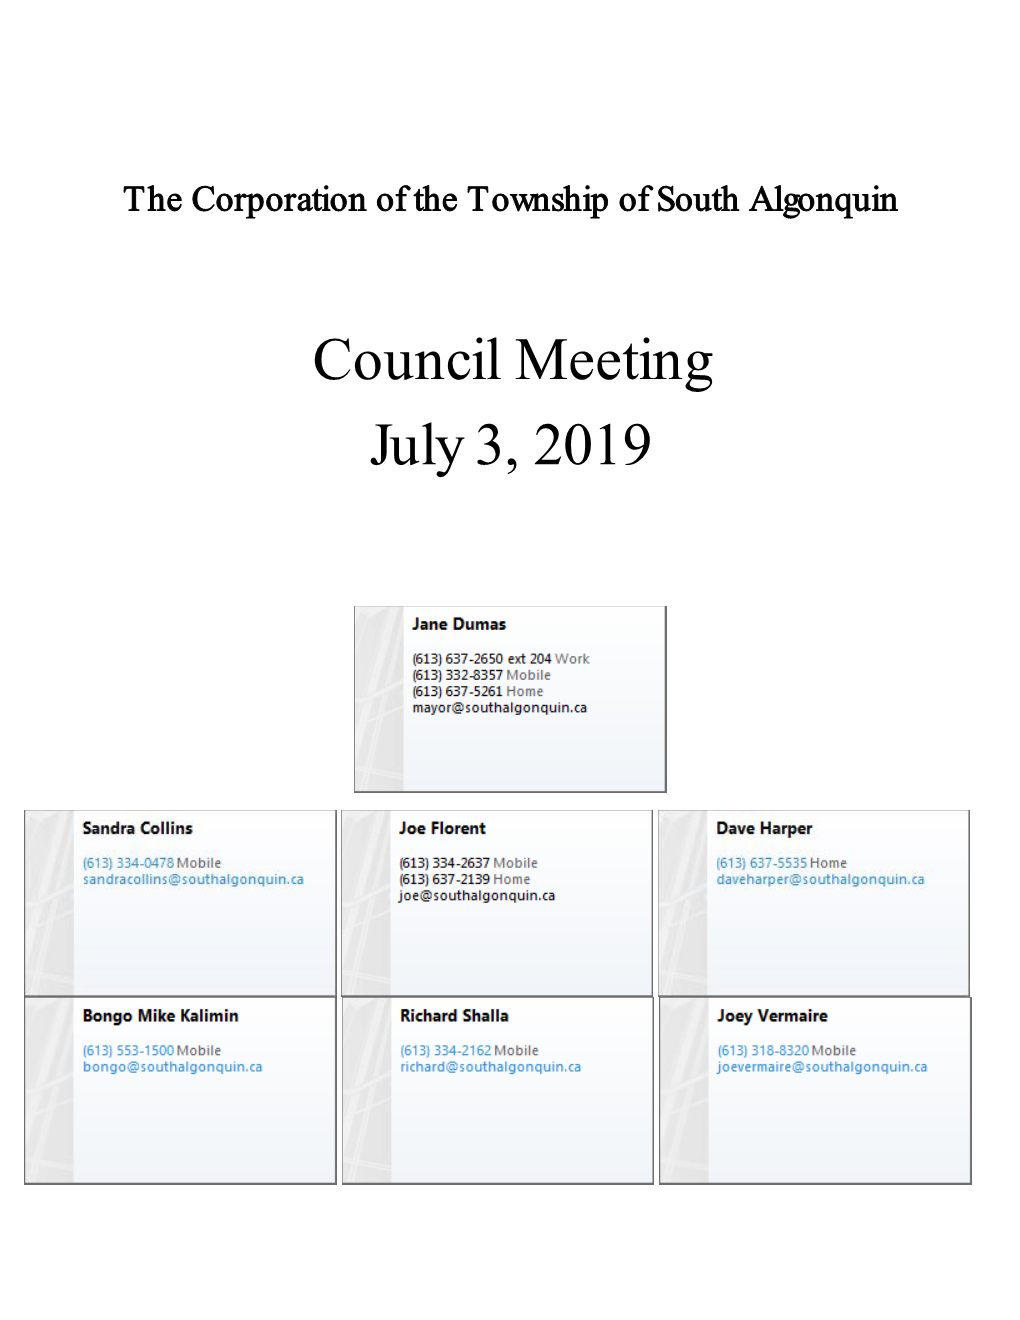 Council Meeting July 3, 2019